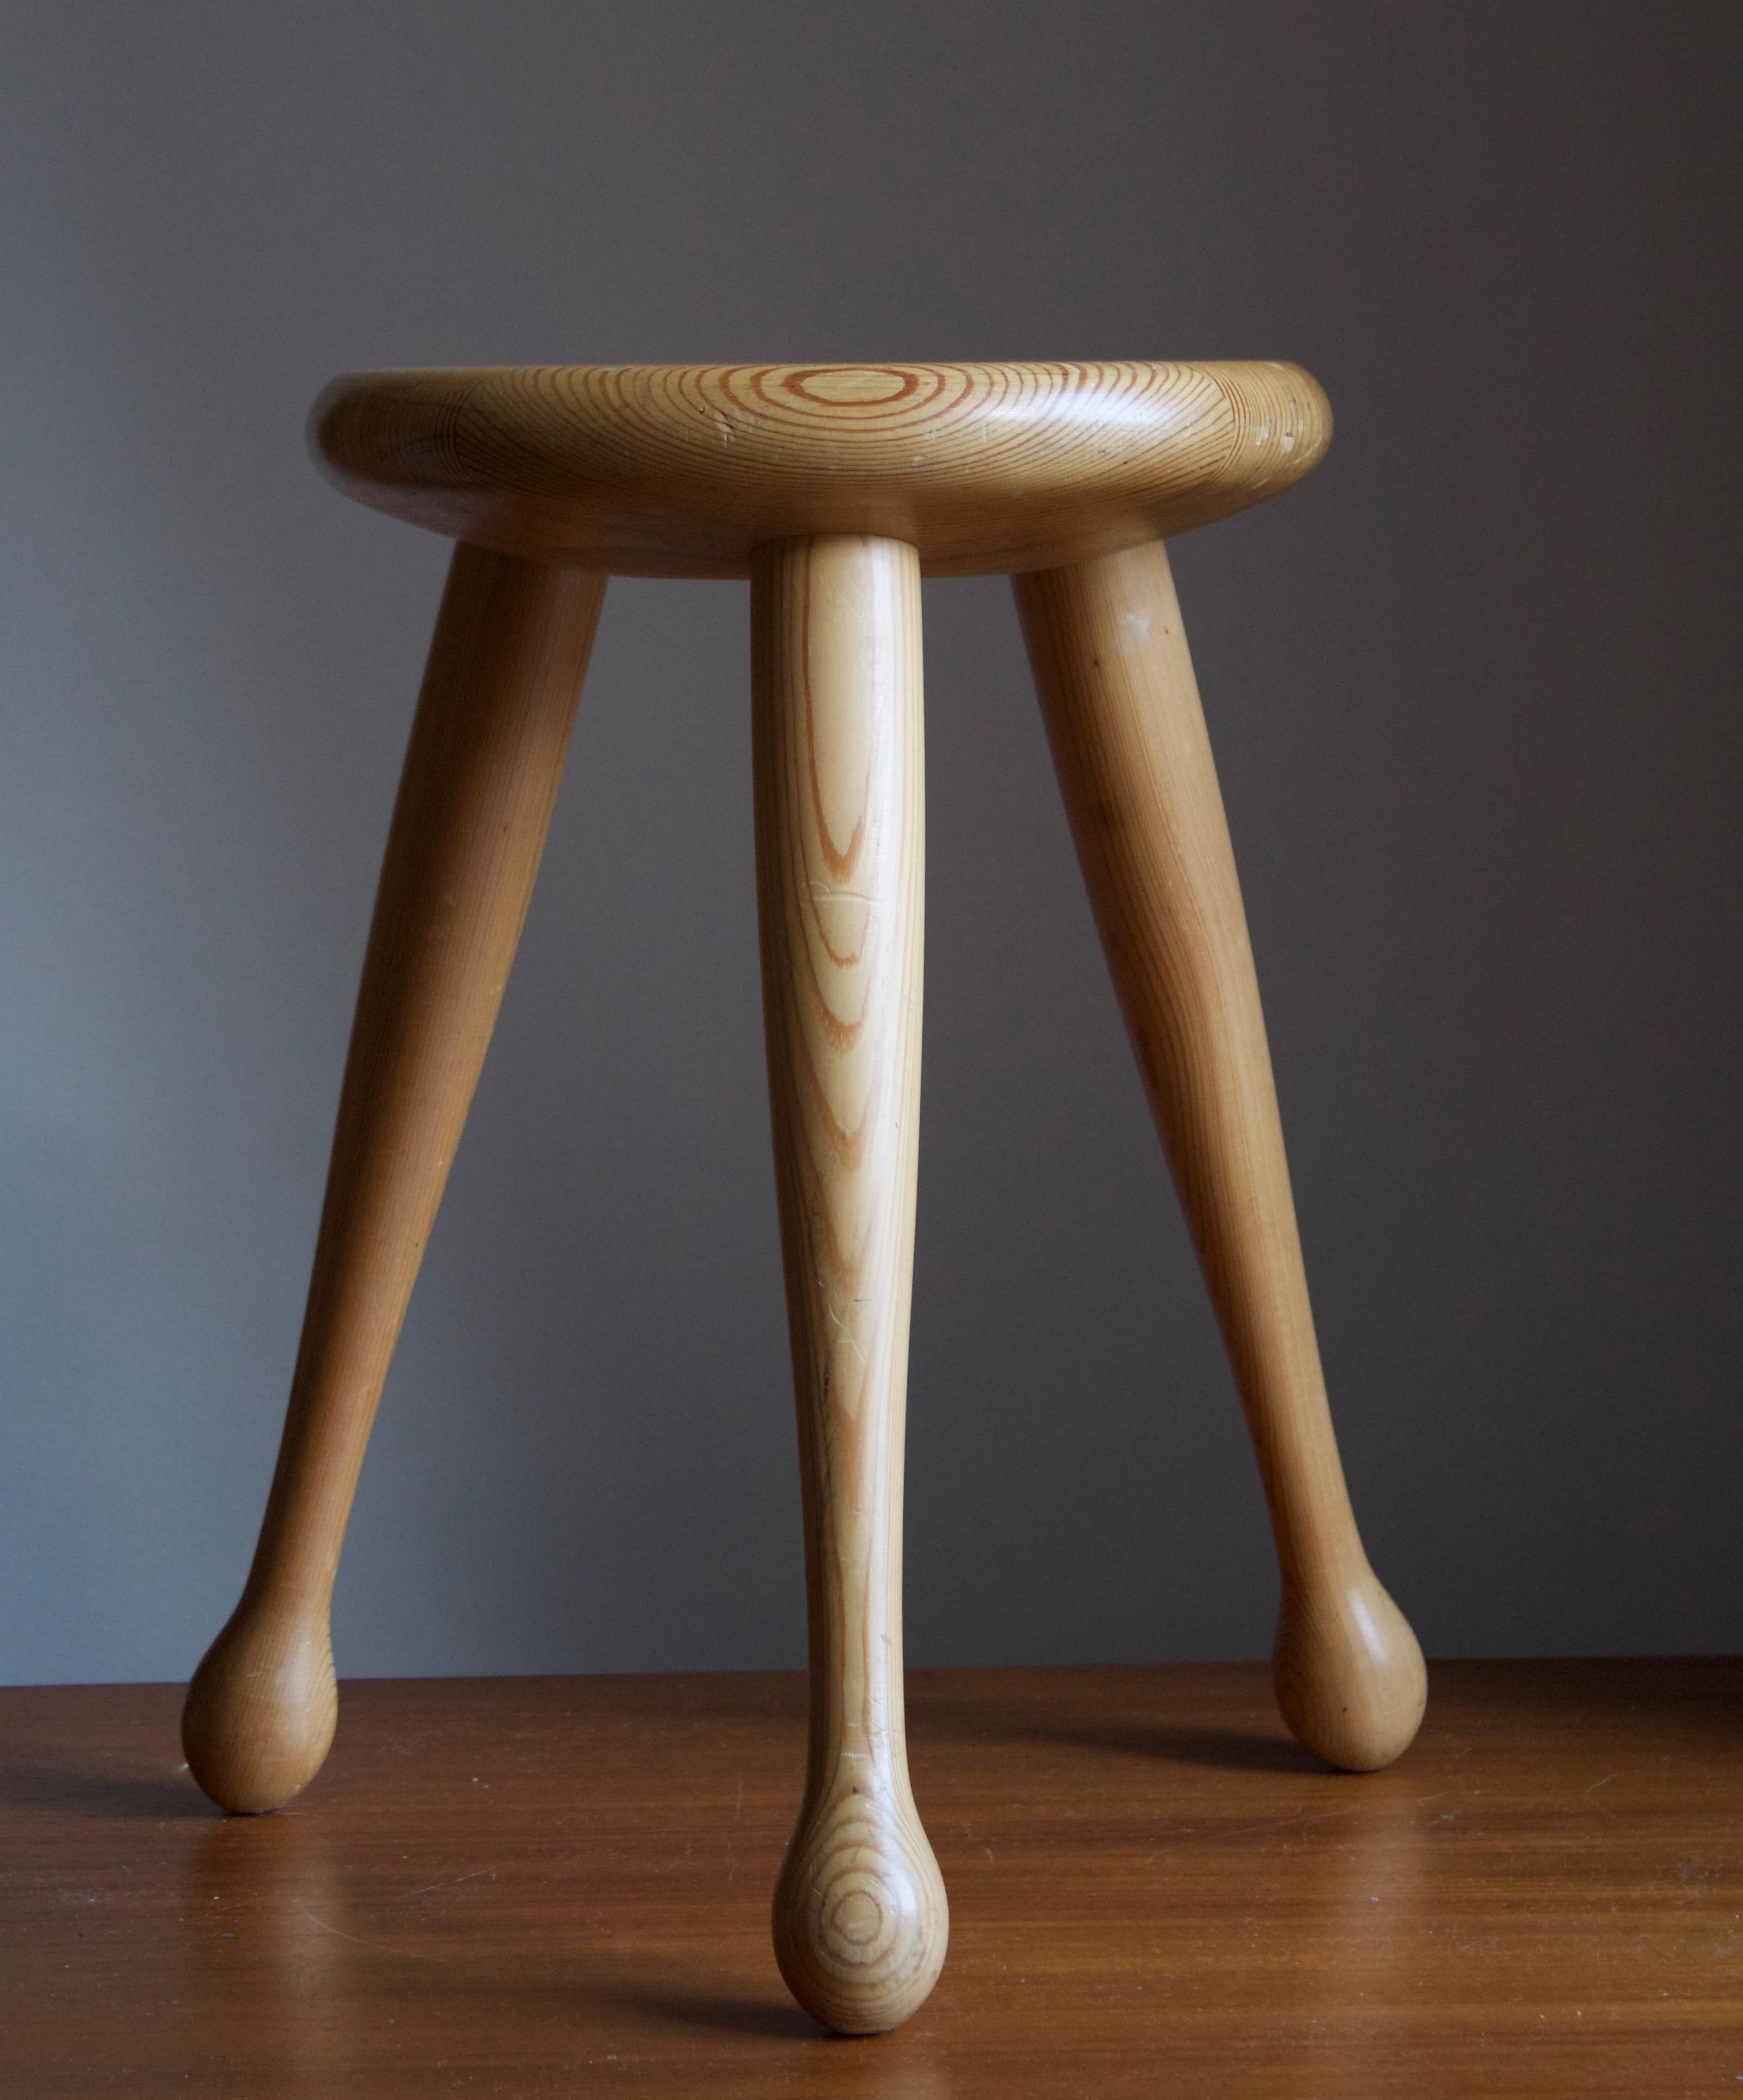 A rare stool, produced by Möbelkompaniet Ahl & Wallén. In finely turned solid pine. Unmarked. 

Other designers of the period include Philip Arctander, Josef Frank, Axel Einar Hjorth, Charlotte Perriand, and Pierre Chapo.